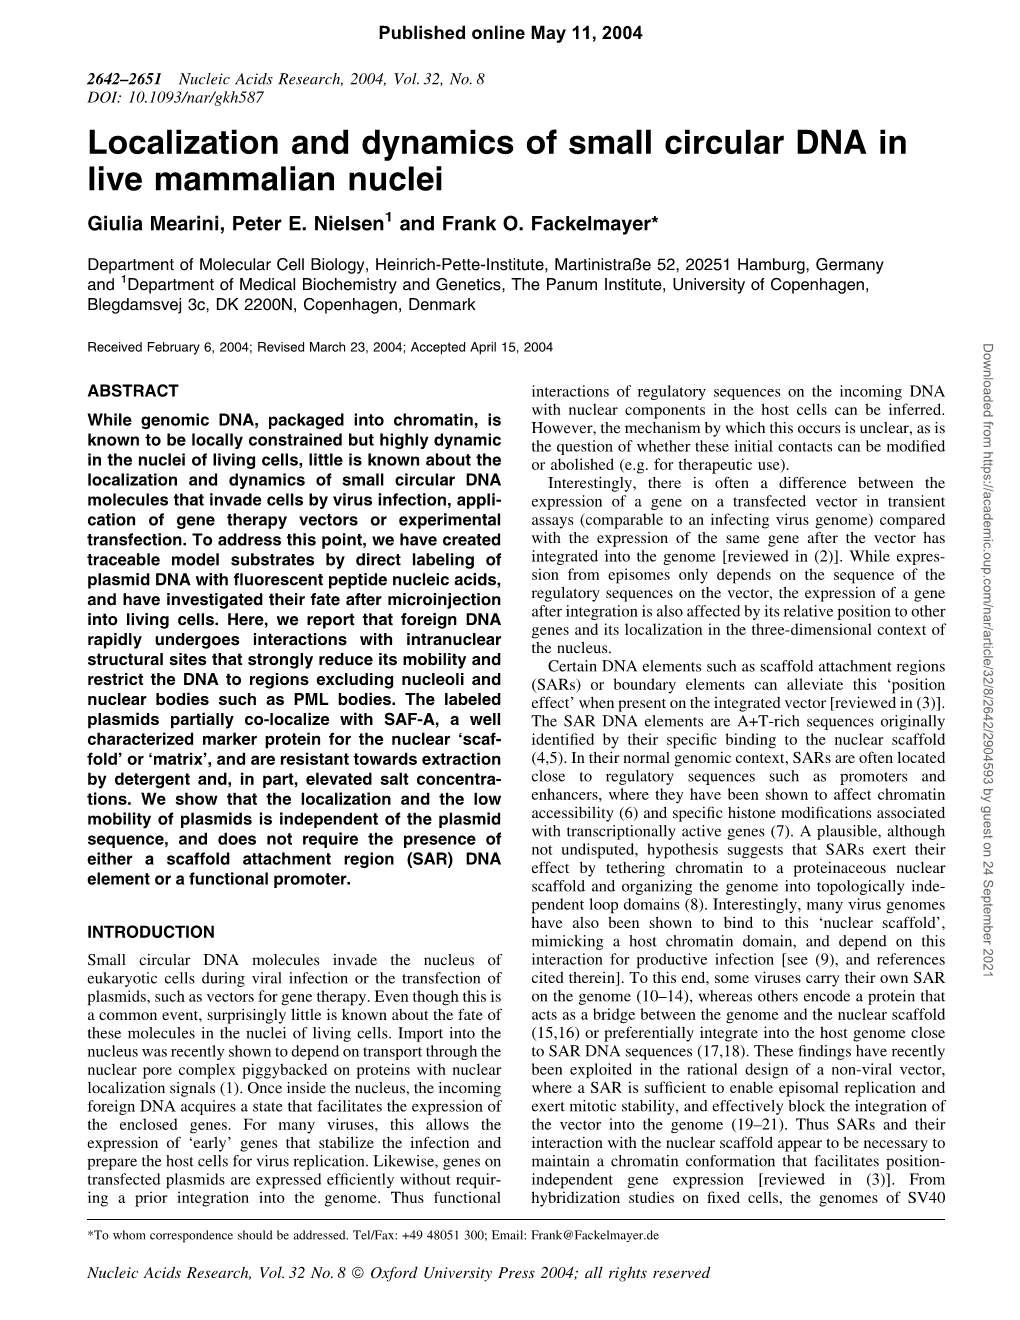 Localization and Dynamics of Small Circular DNA in Live Mammalian Nuclei